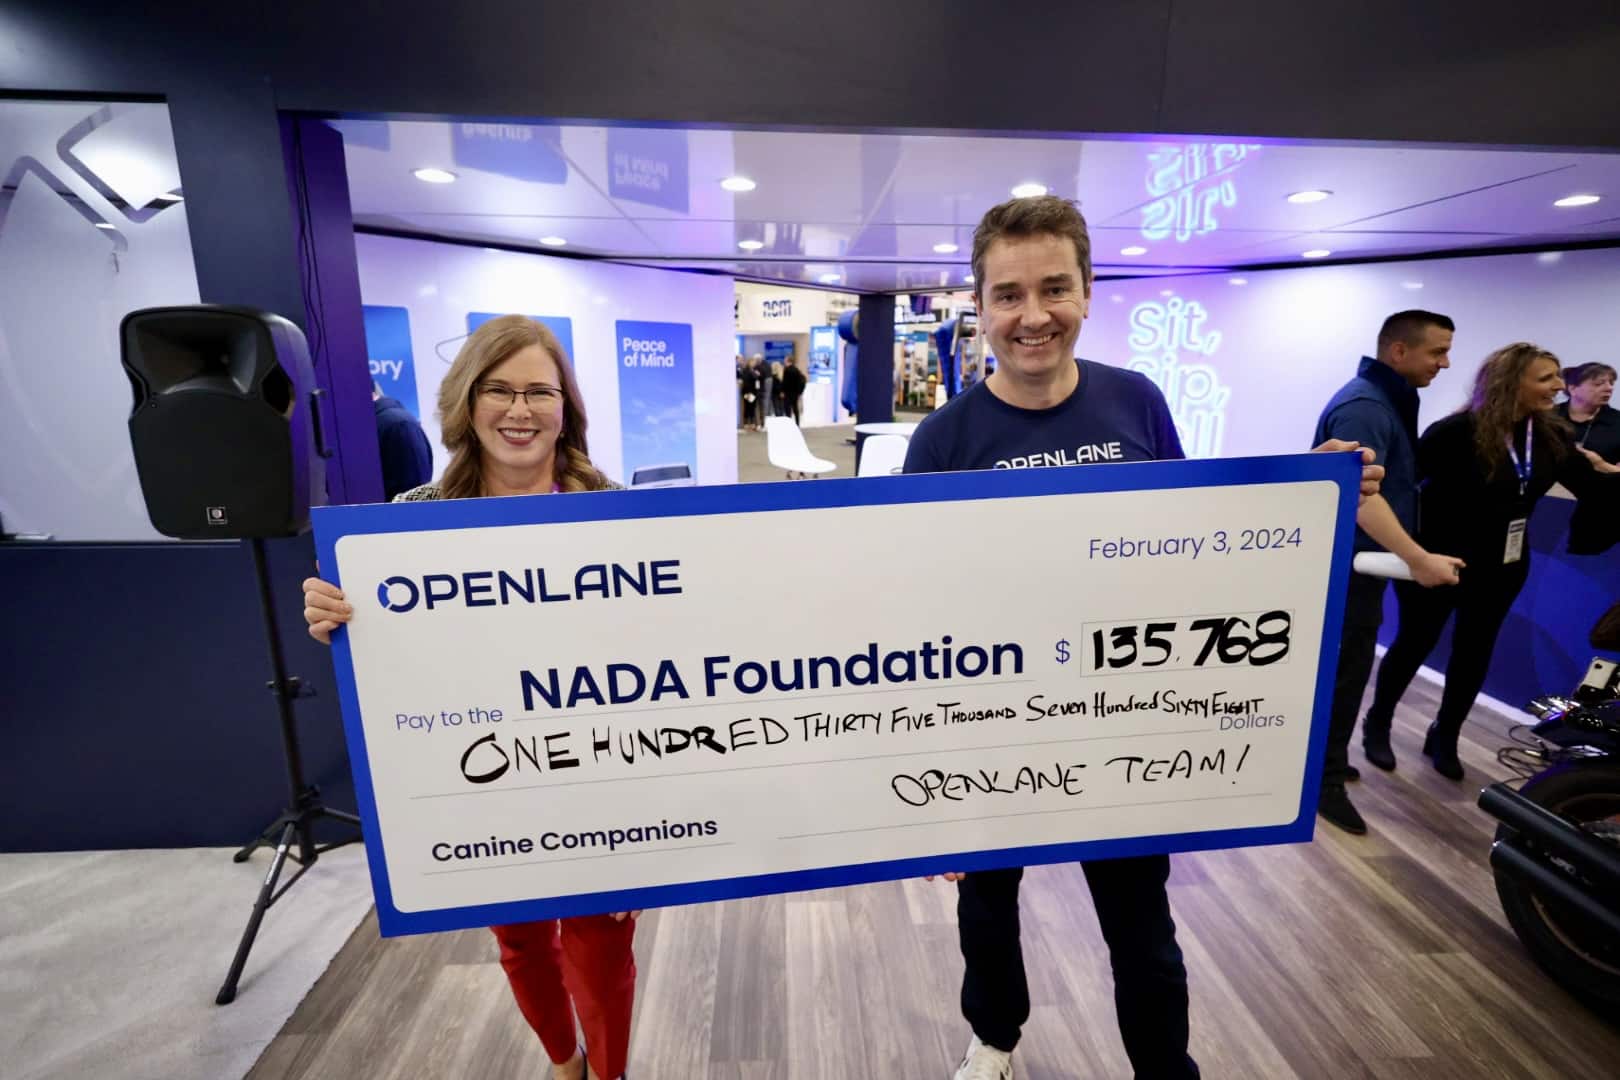 Two smiling individuals proudly display a large ceremonial check from OPENLANE to the NADA Foundation for $135,768, benefiting Canine Companions, dated February 3, 2024.